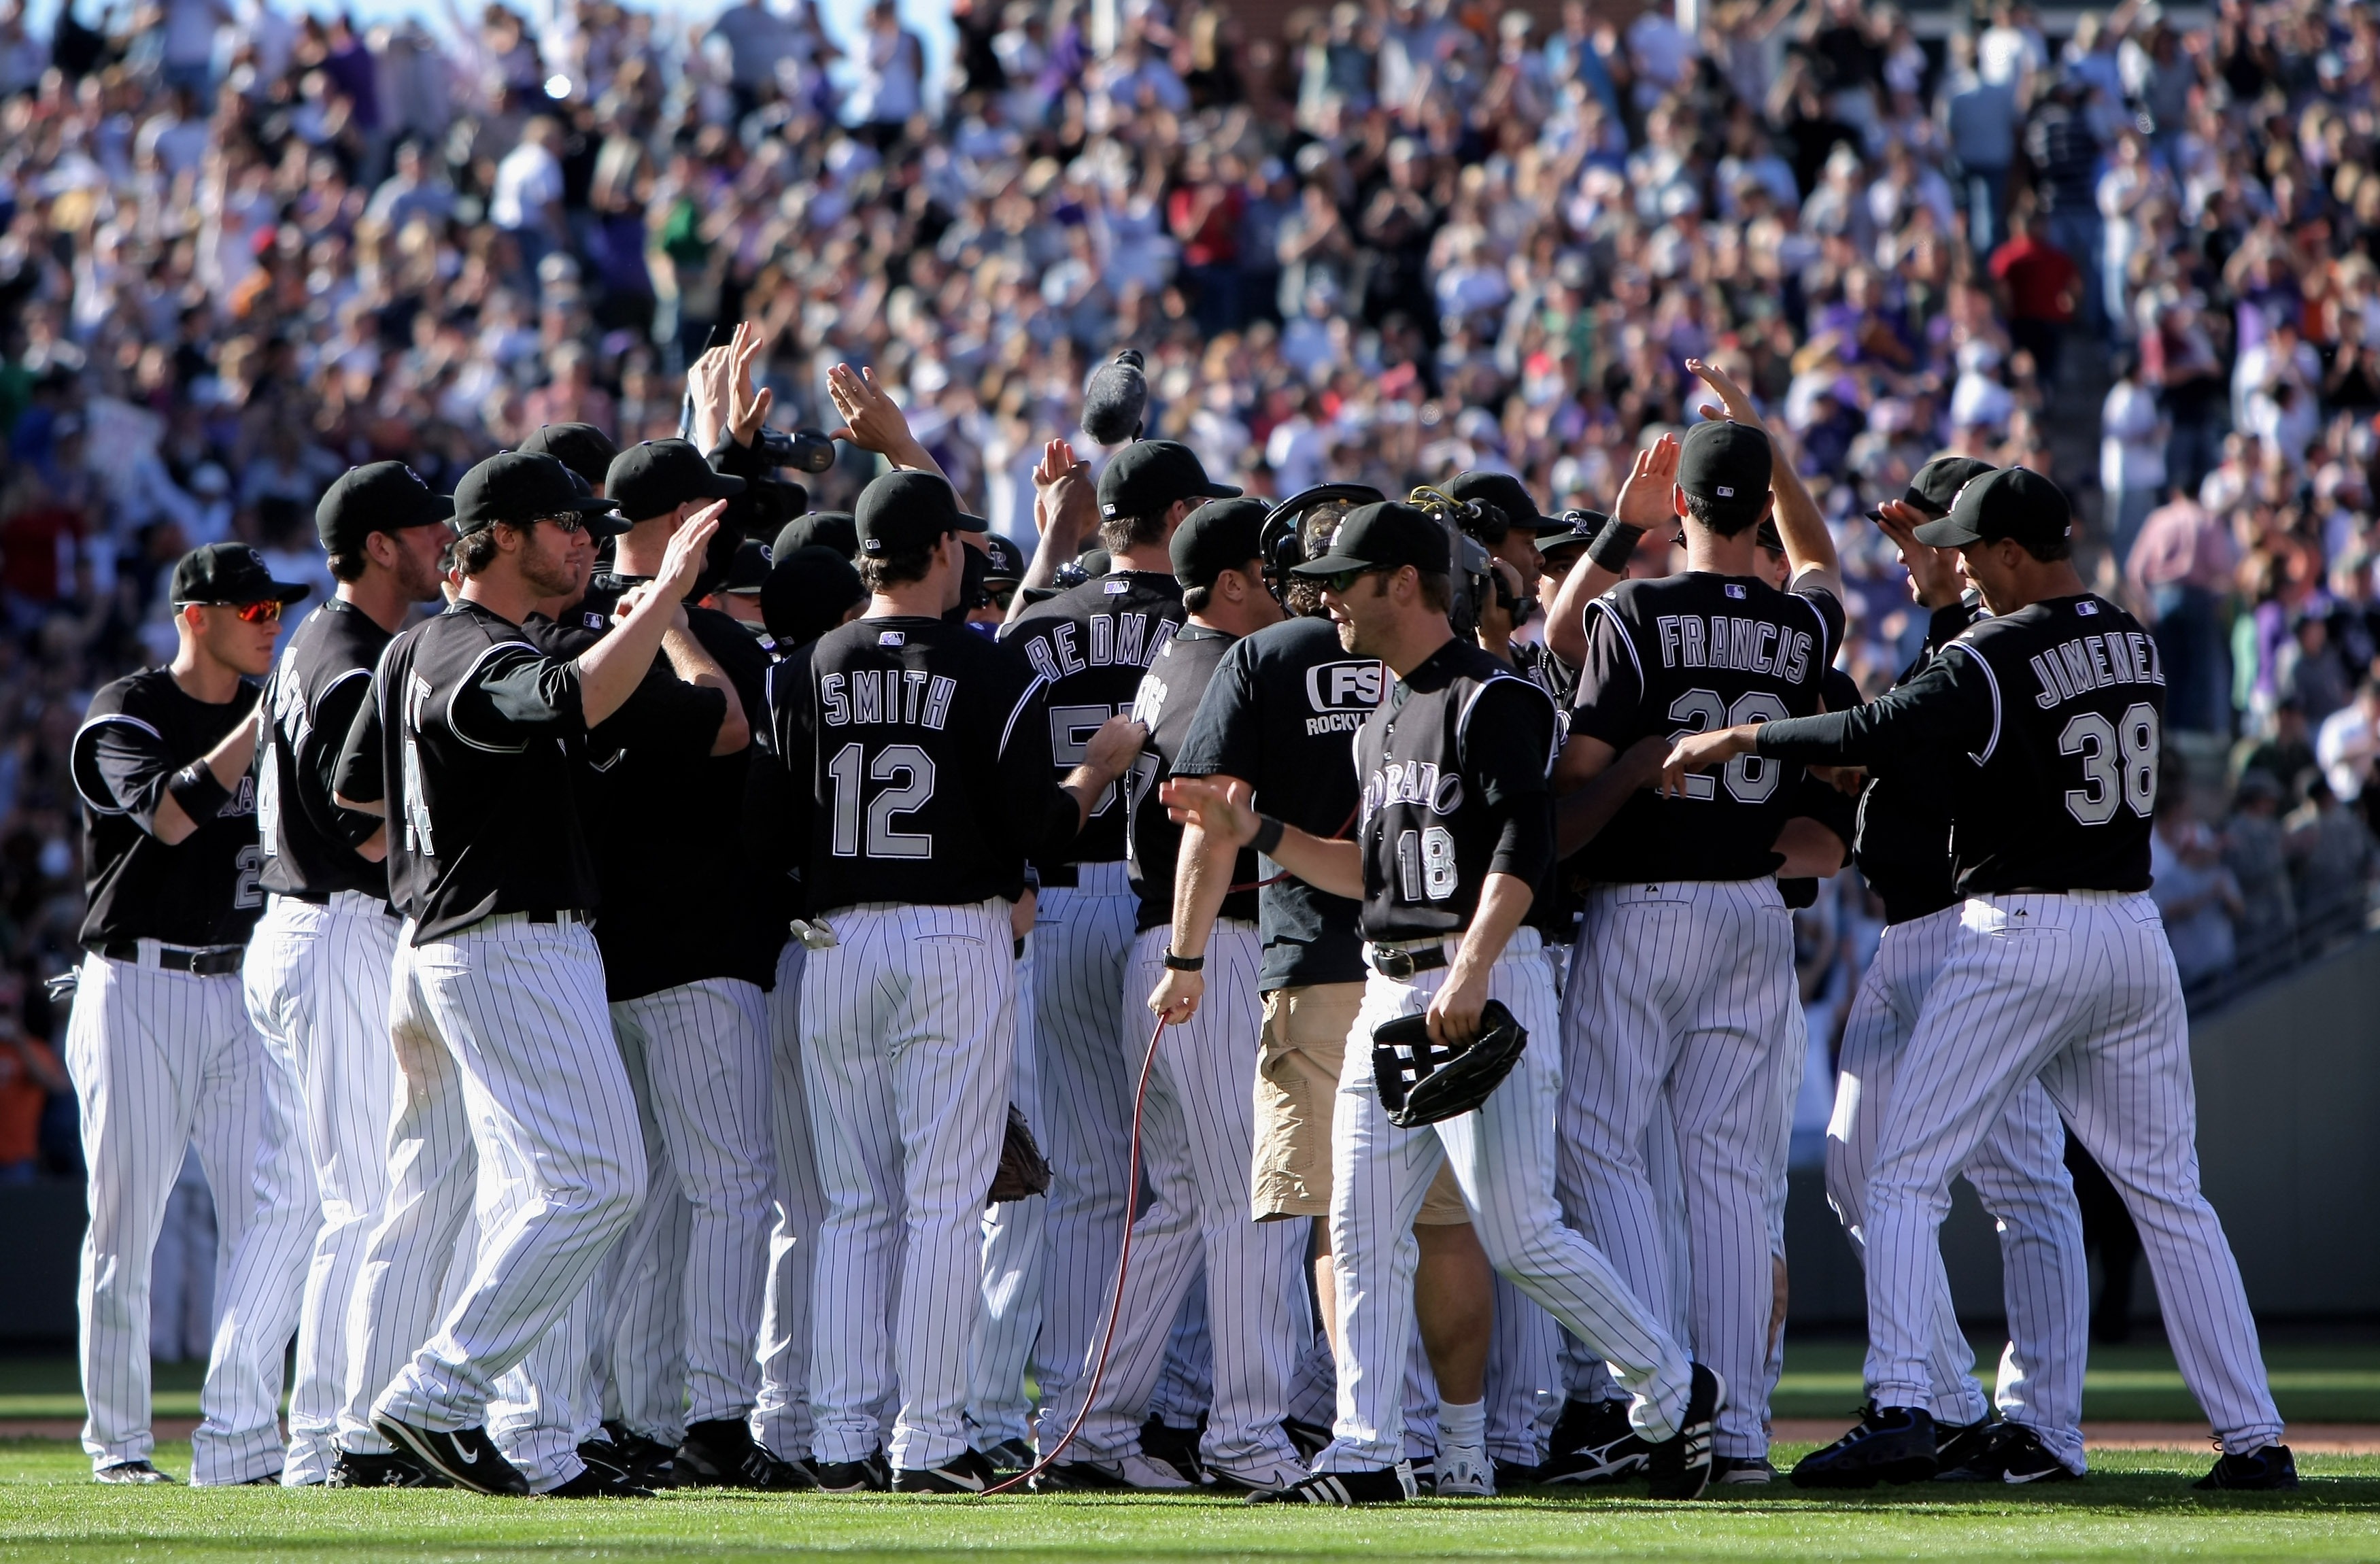 Rocktober Relived: October 15, 2007--Rockies win the pennant